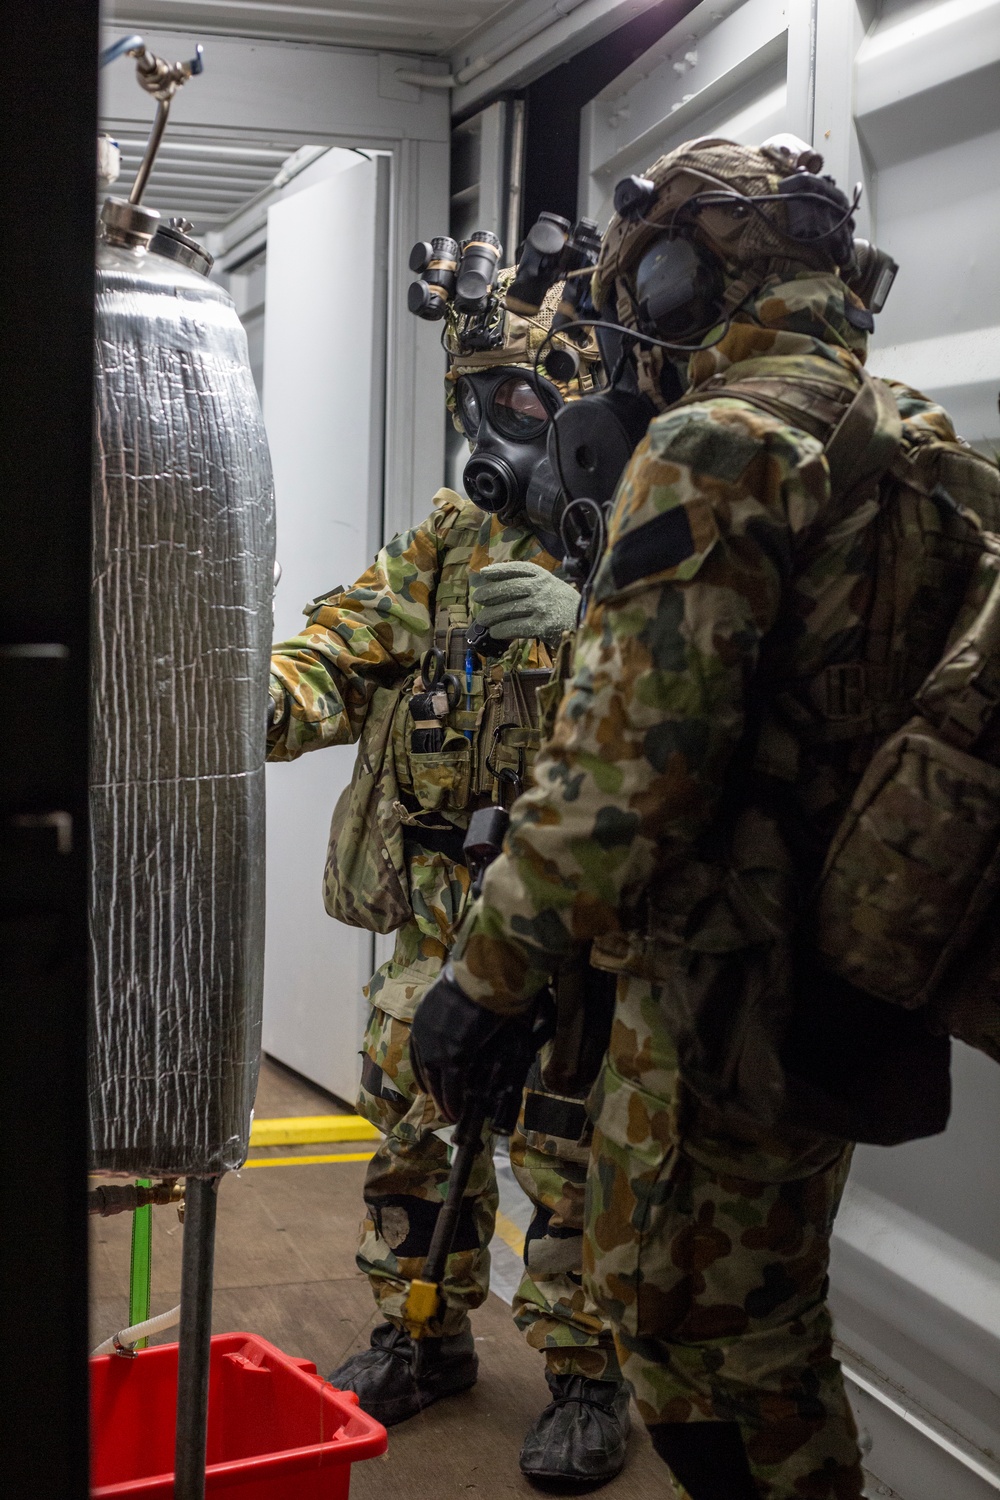 U.S. and Australian Special Operations Forces (SOF) in Talisman Saber 2019